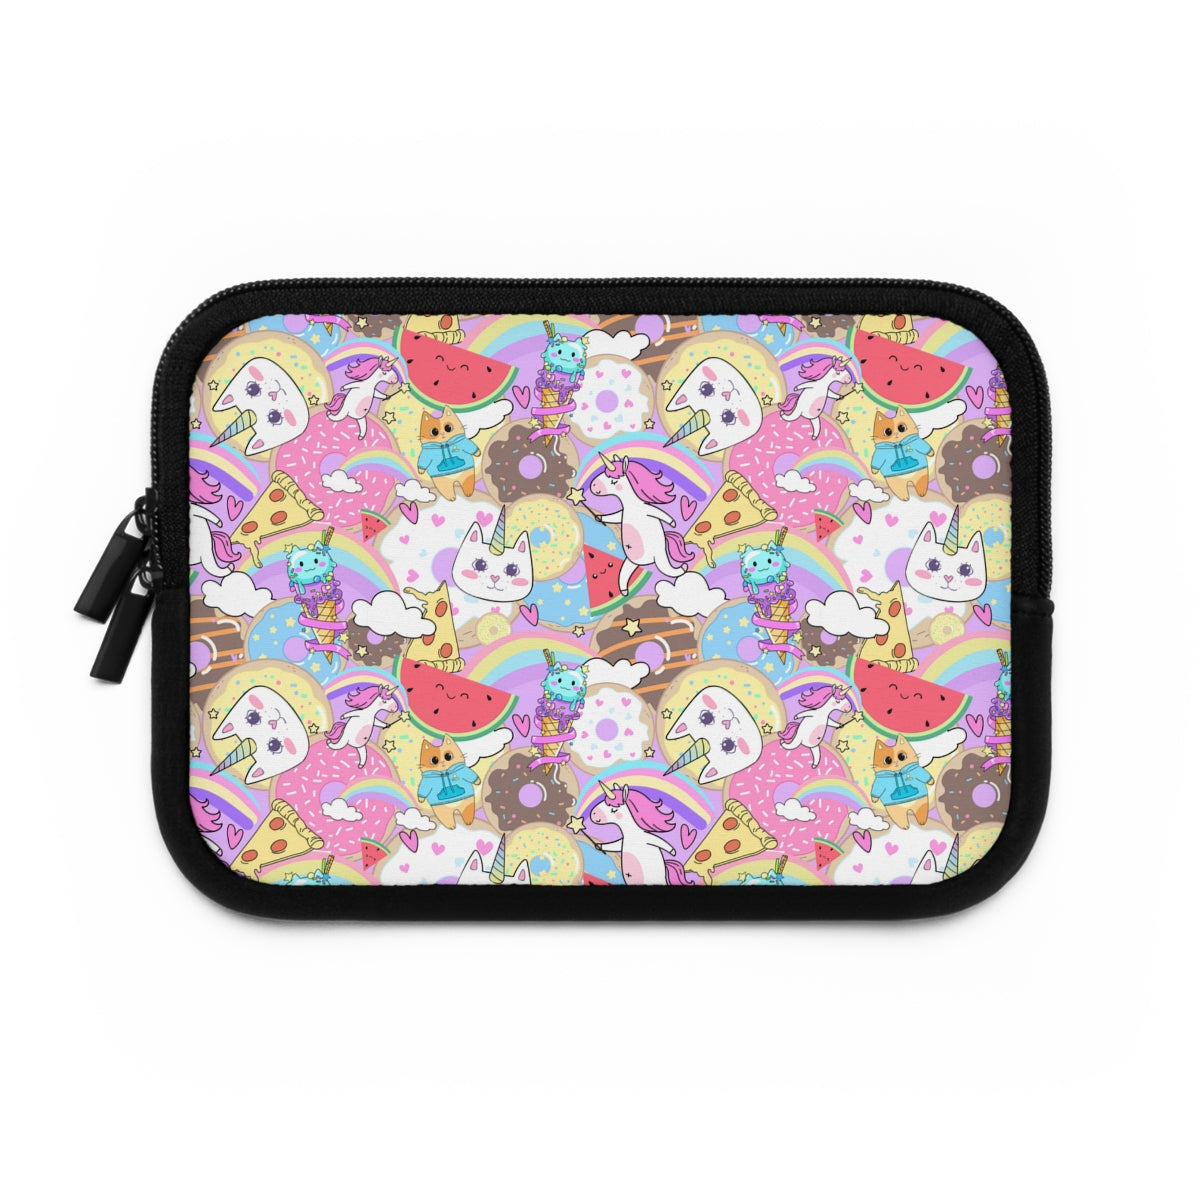 Unicorn Cats and Watermelons Laptop Sleeve